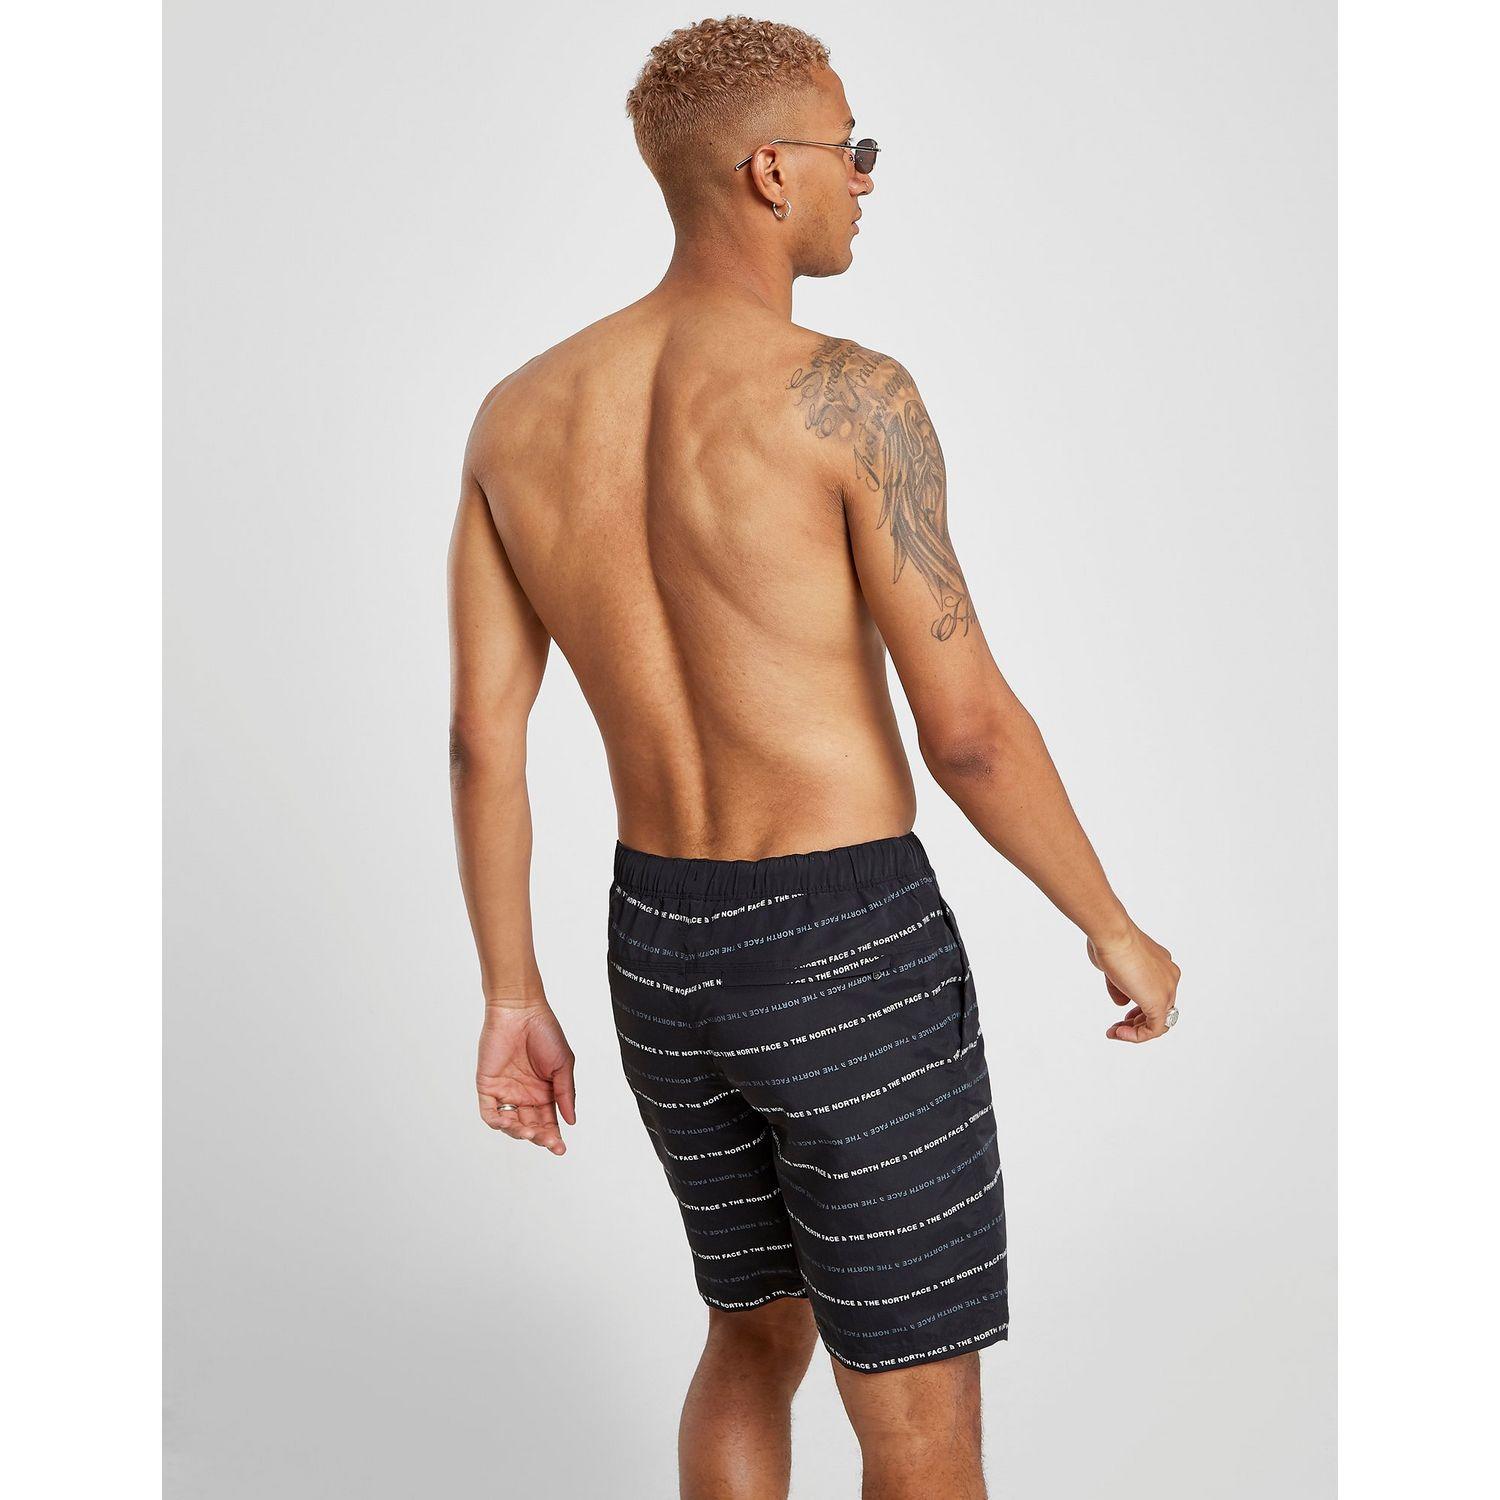 the north face swim shorts Online 